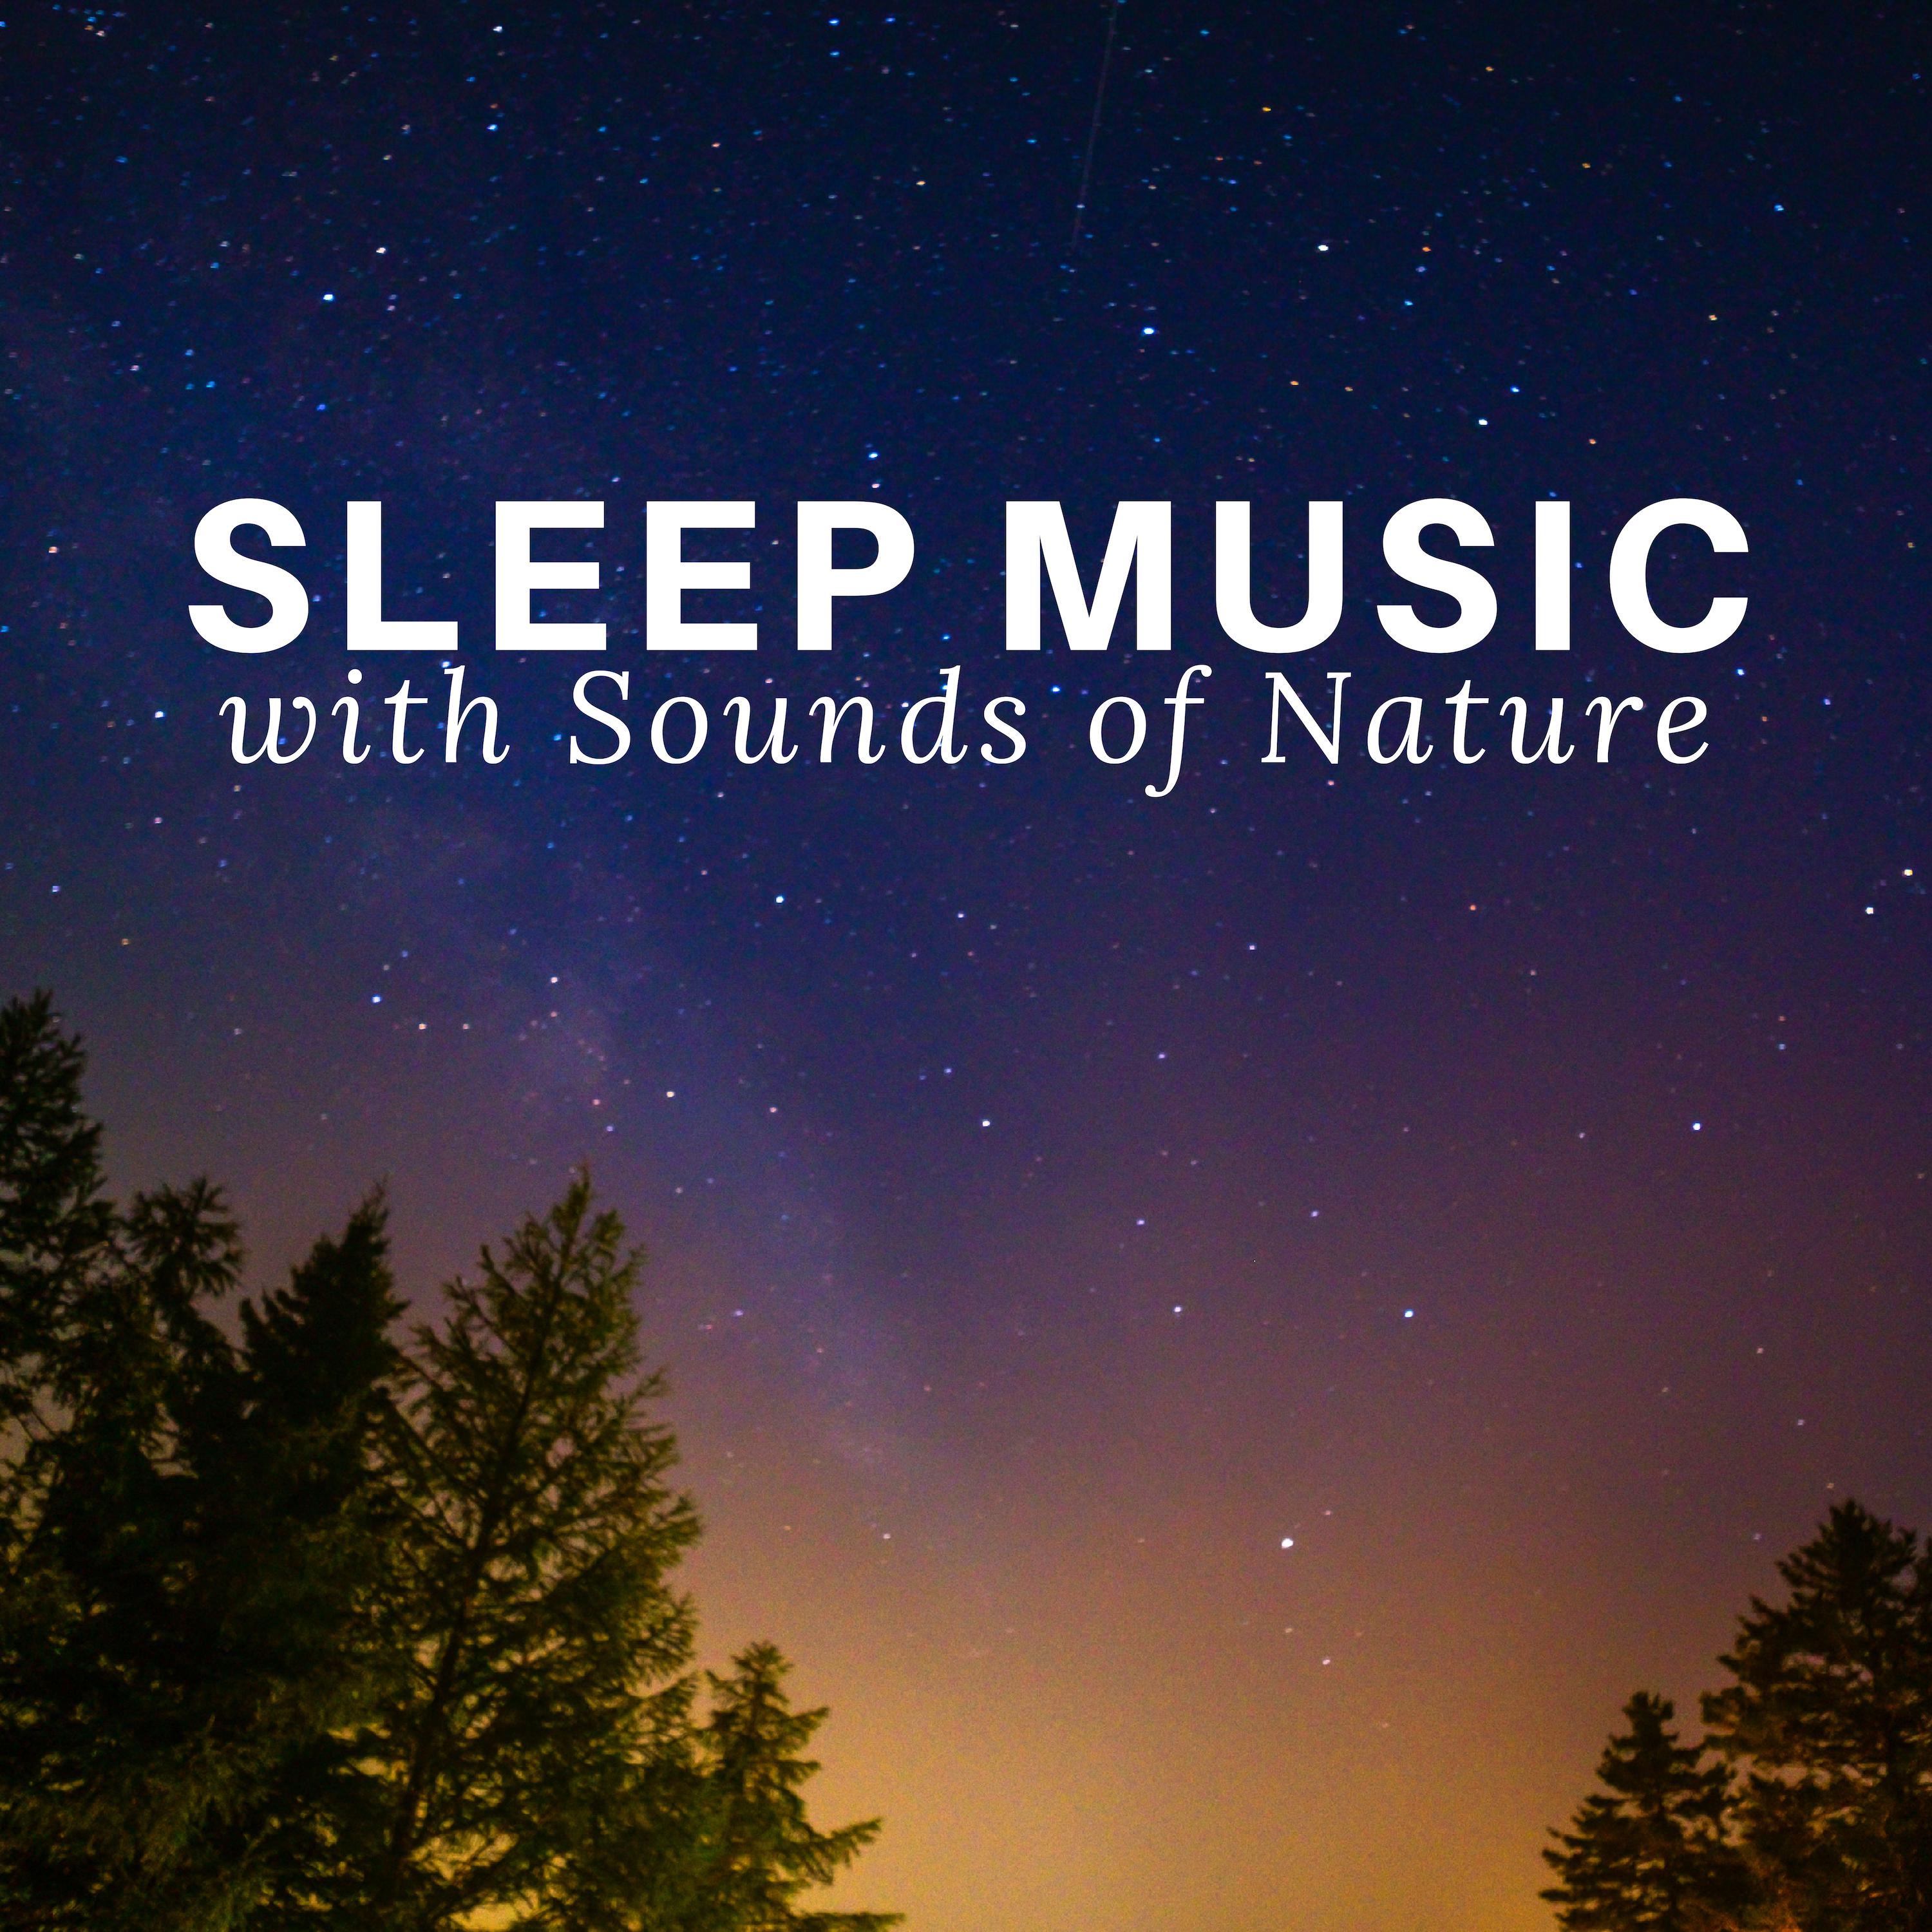 Sleep Music with Sounds of Nature - CD to Help Sleep All Through the Night